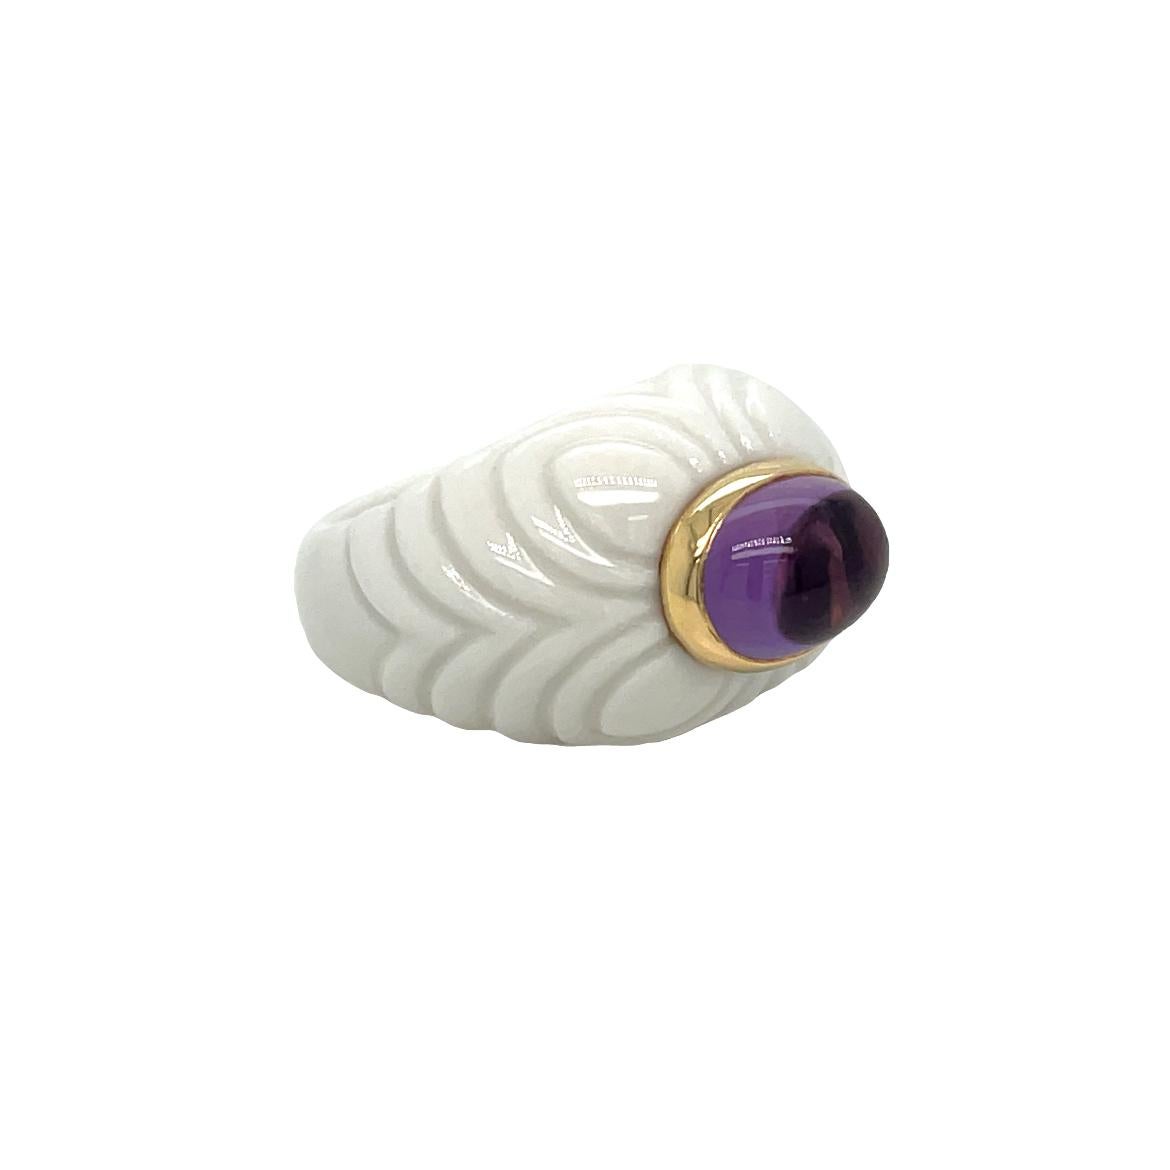 A beautiful ring in 18kt yellow gold and white porcelain, set with one natural Tourmaline Cabochon cut. Signed Bulgari, from the “Chandra” collection, Made in Italy, circa 1990.
Designed as a series of part textured porcelain spheres depicting a